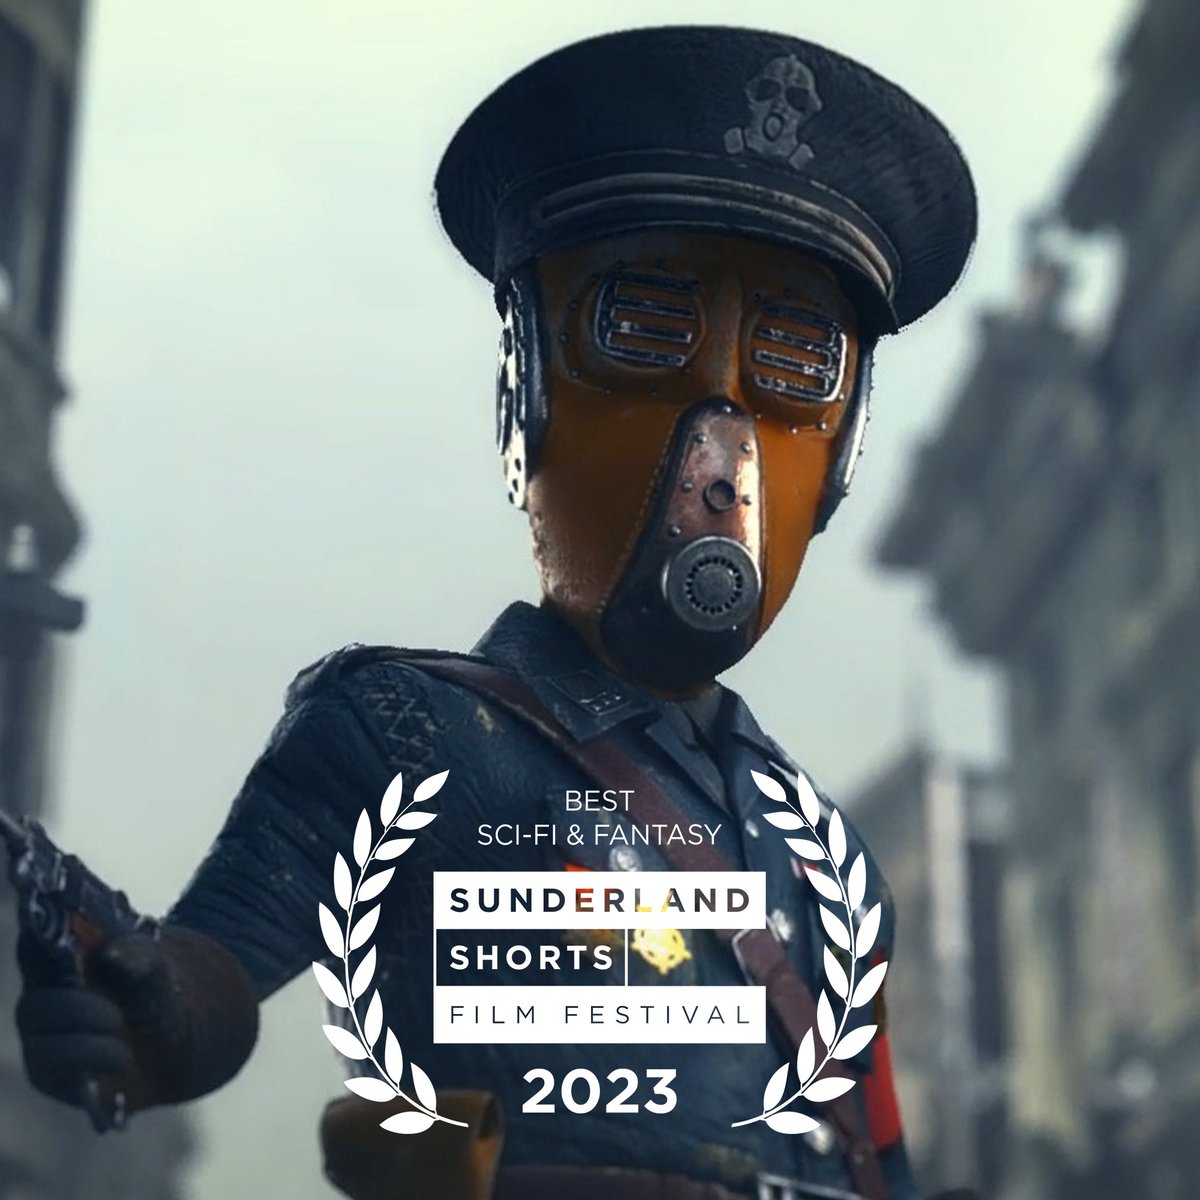 🏆 BEST SCI-FI & FANTASY 🏆

In the land occupied with the sprayers army, no one has the right to grow any kind of plants either in public or private. Until a seed starts something revolutionary!

Congratulations to THE SPRAYER our 2023 Best Sci-fi and Fantasy Winner! #SSFF23